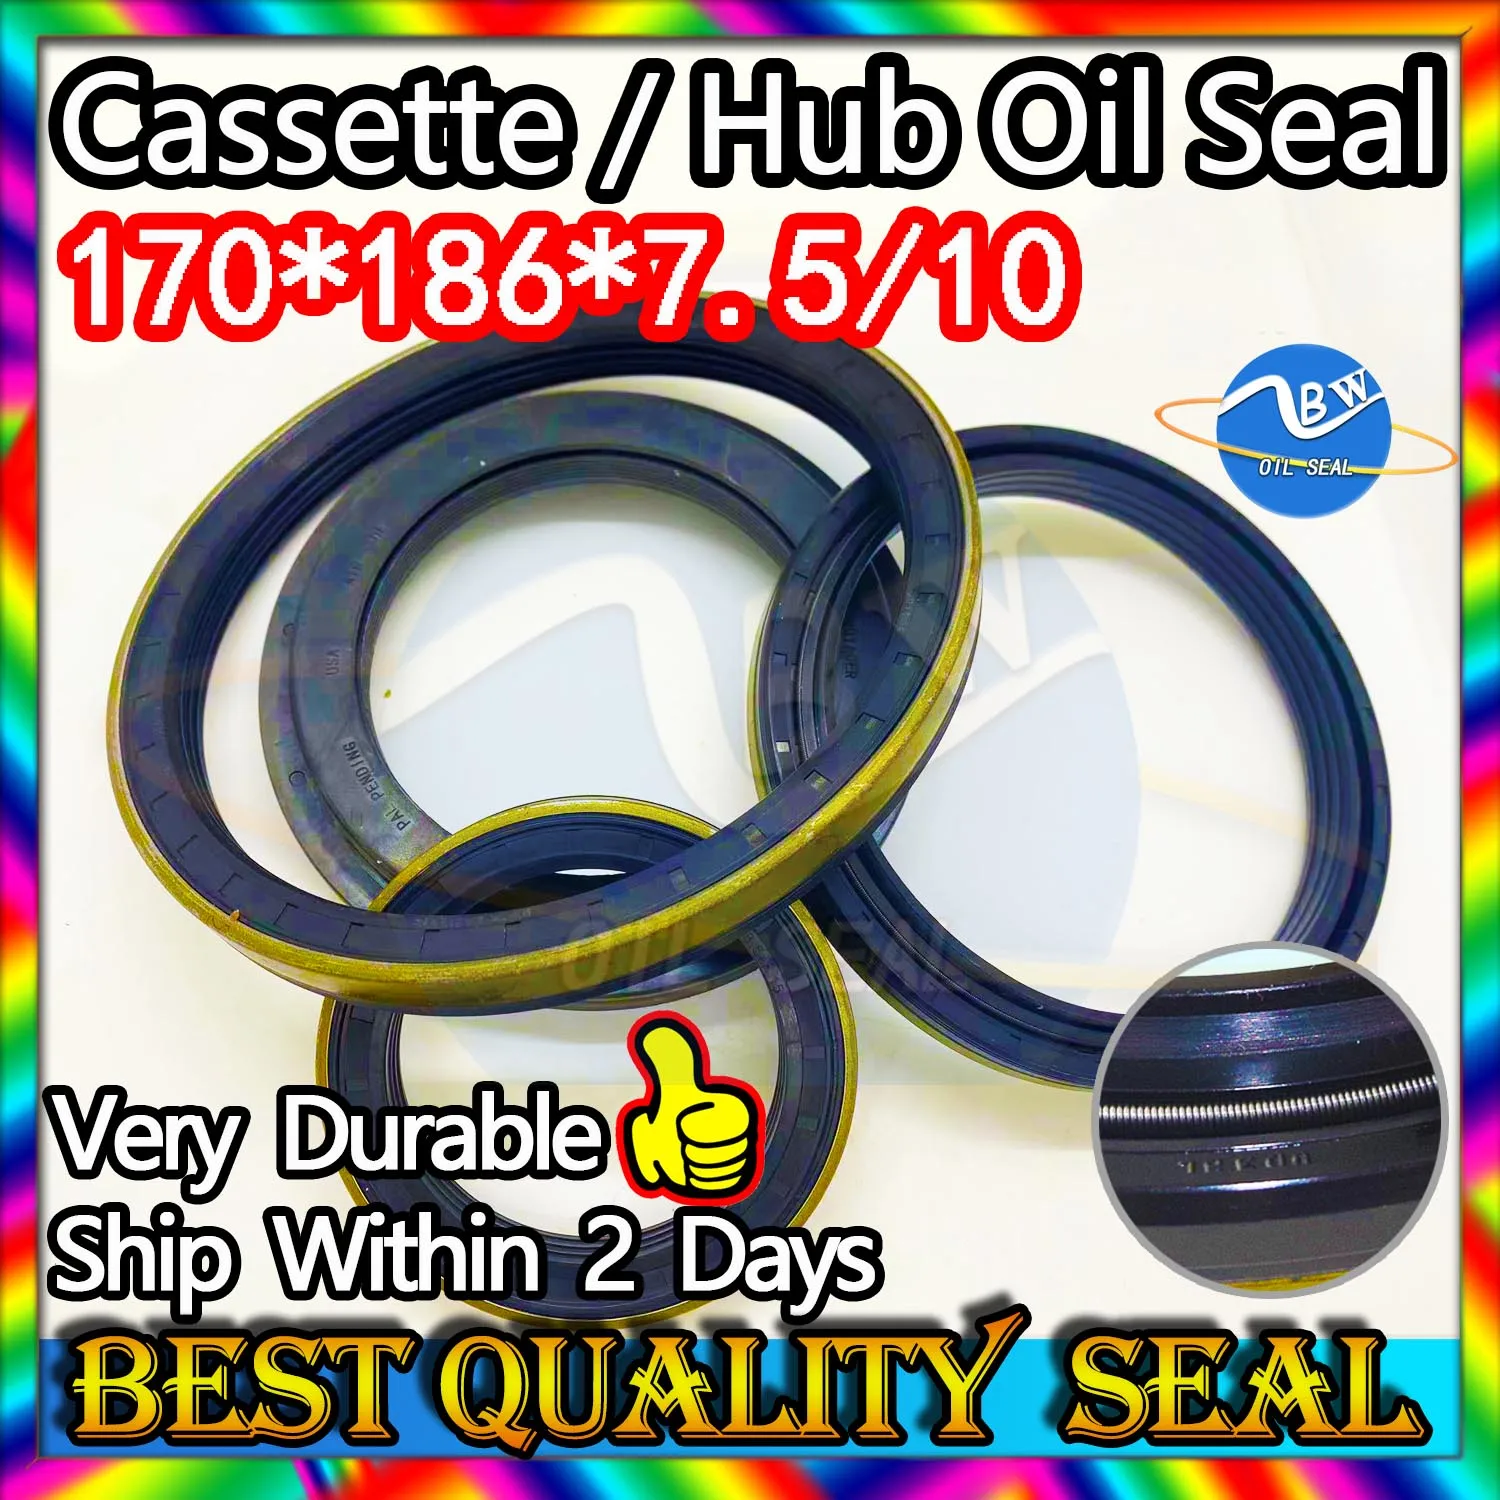 

Cassette Oil Seal 170*186*7.5/10 AE8190E Hub Oil Sealing For Tractor Cat High Quality 170X186X7.5/10 AE8190E Parts MOTOR Shaft